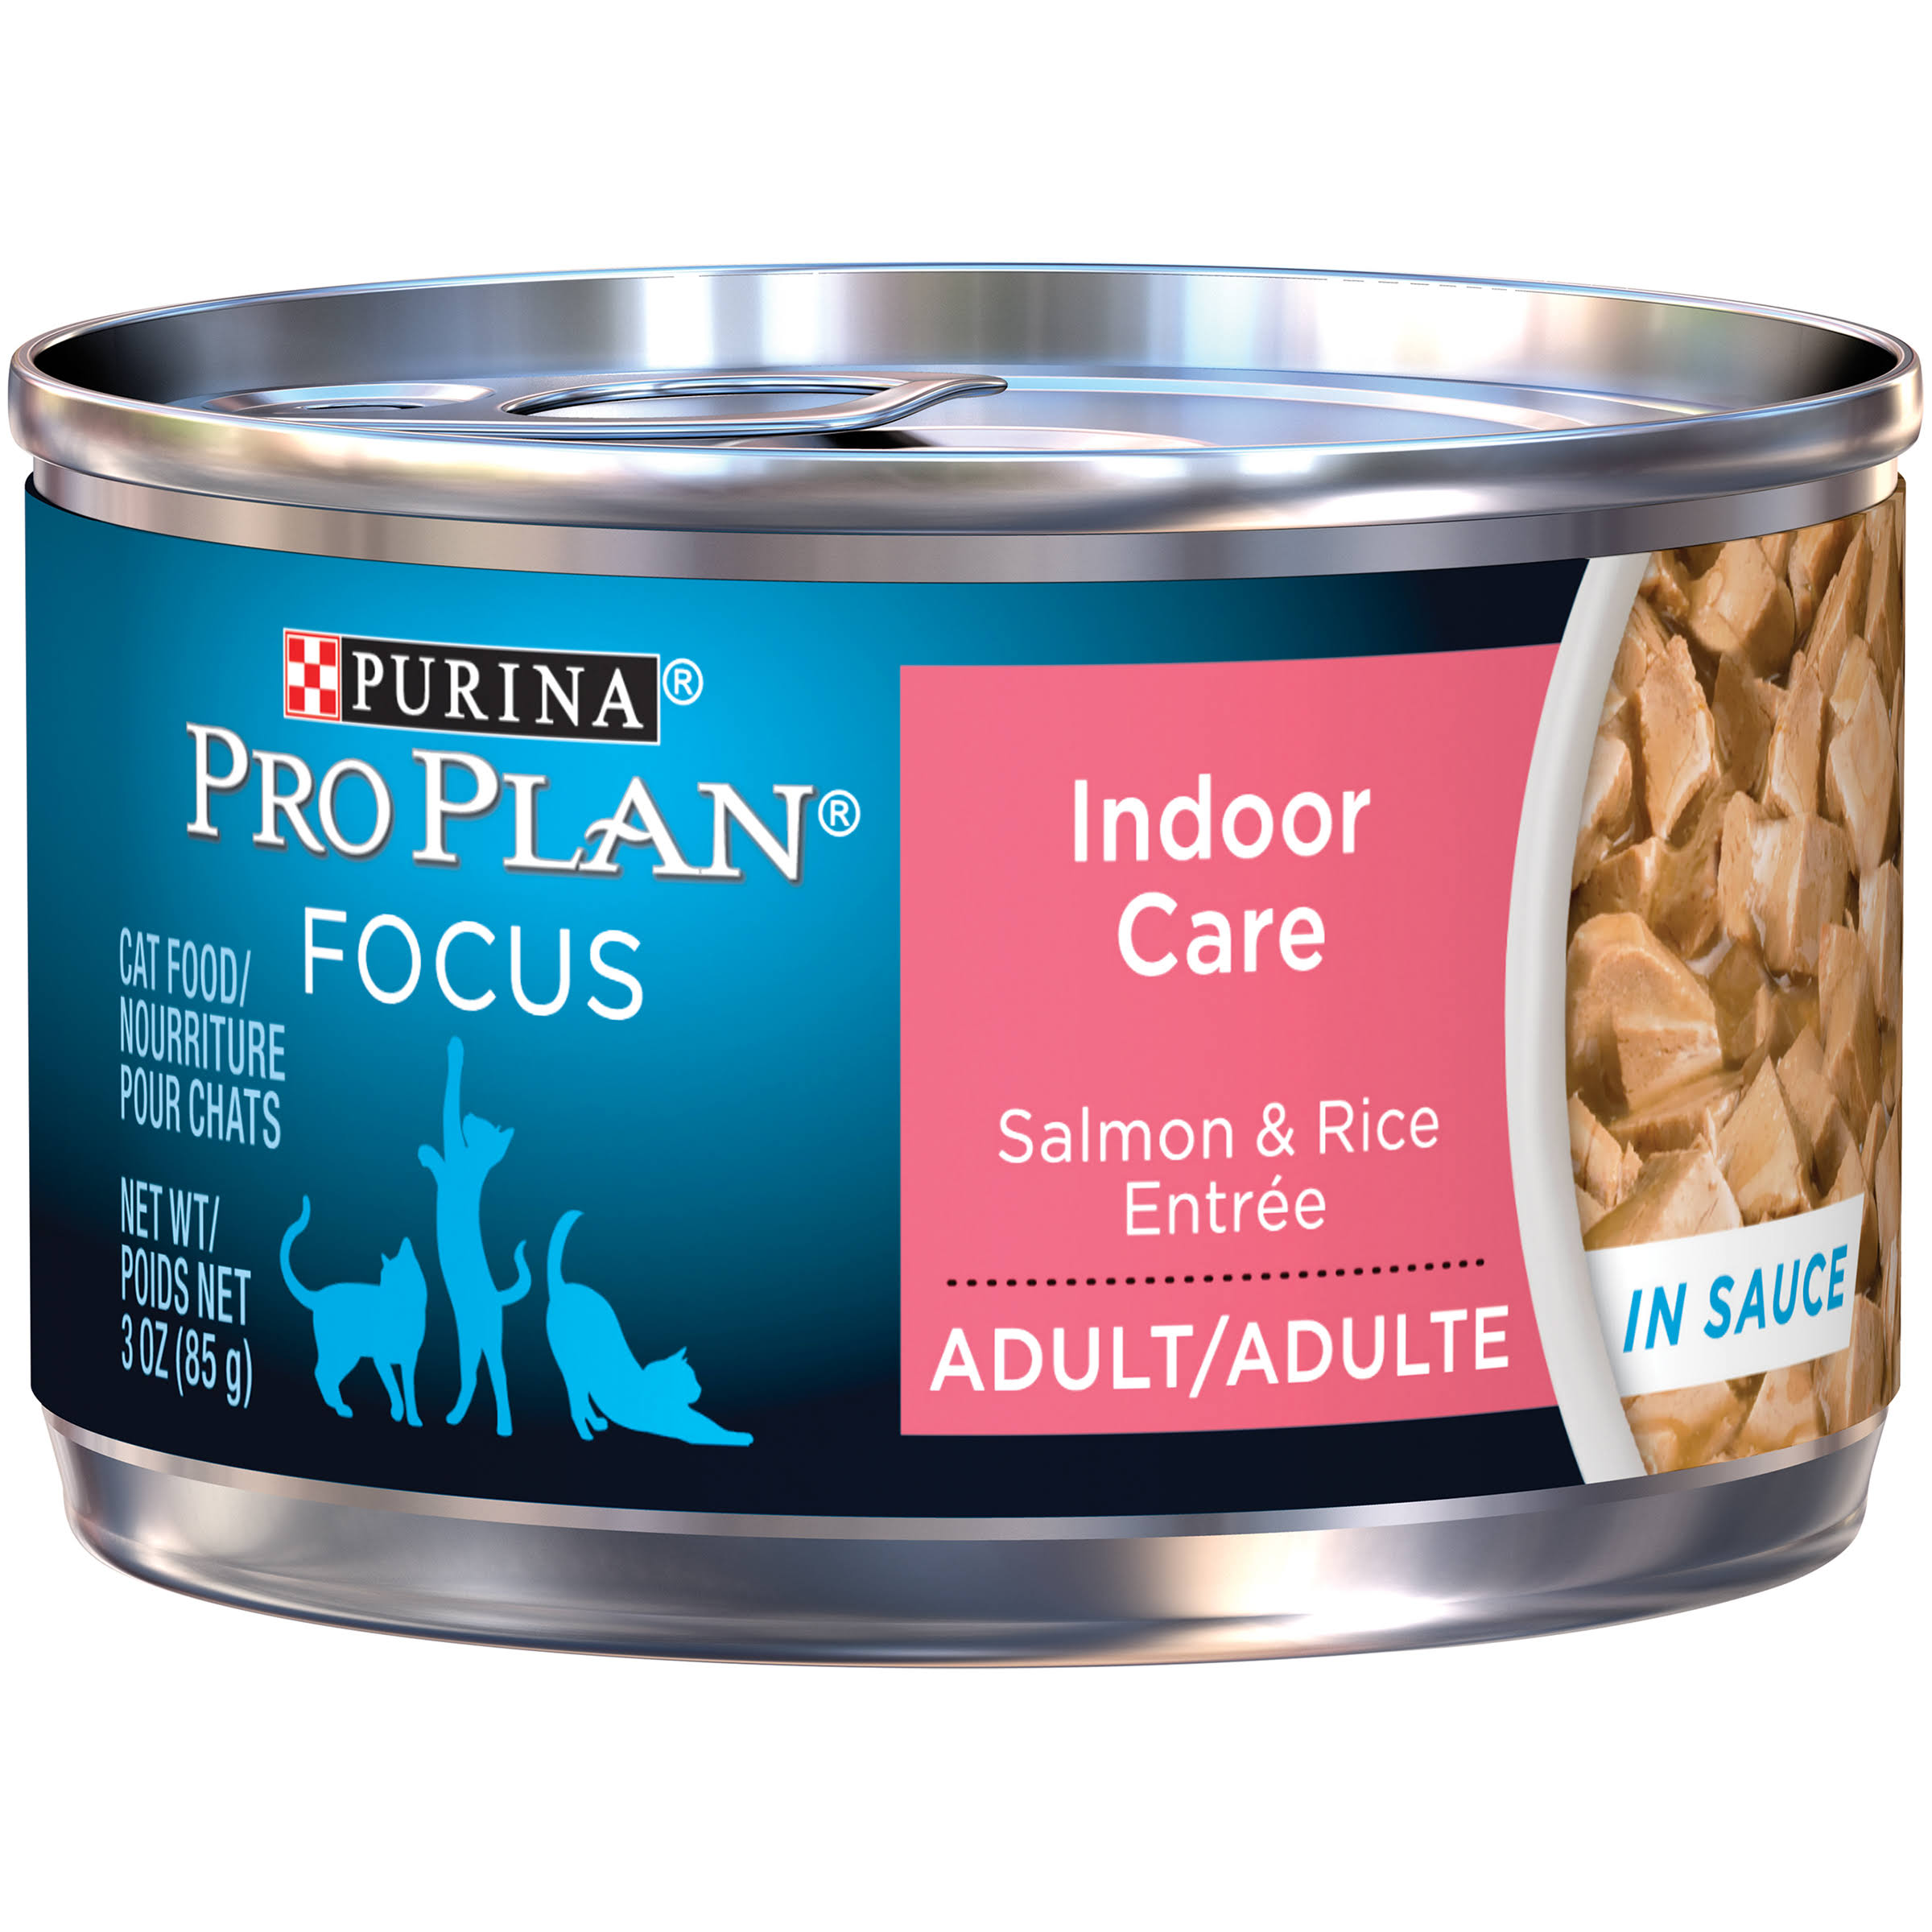 Purina Pro Plan, Indoor Cat Food, Indoor Care Salmon and Rice in Sauce Entree - 3 oz Pull-Top Cans